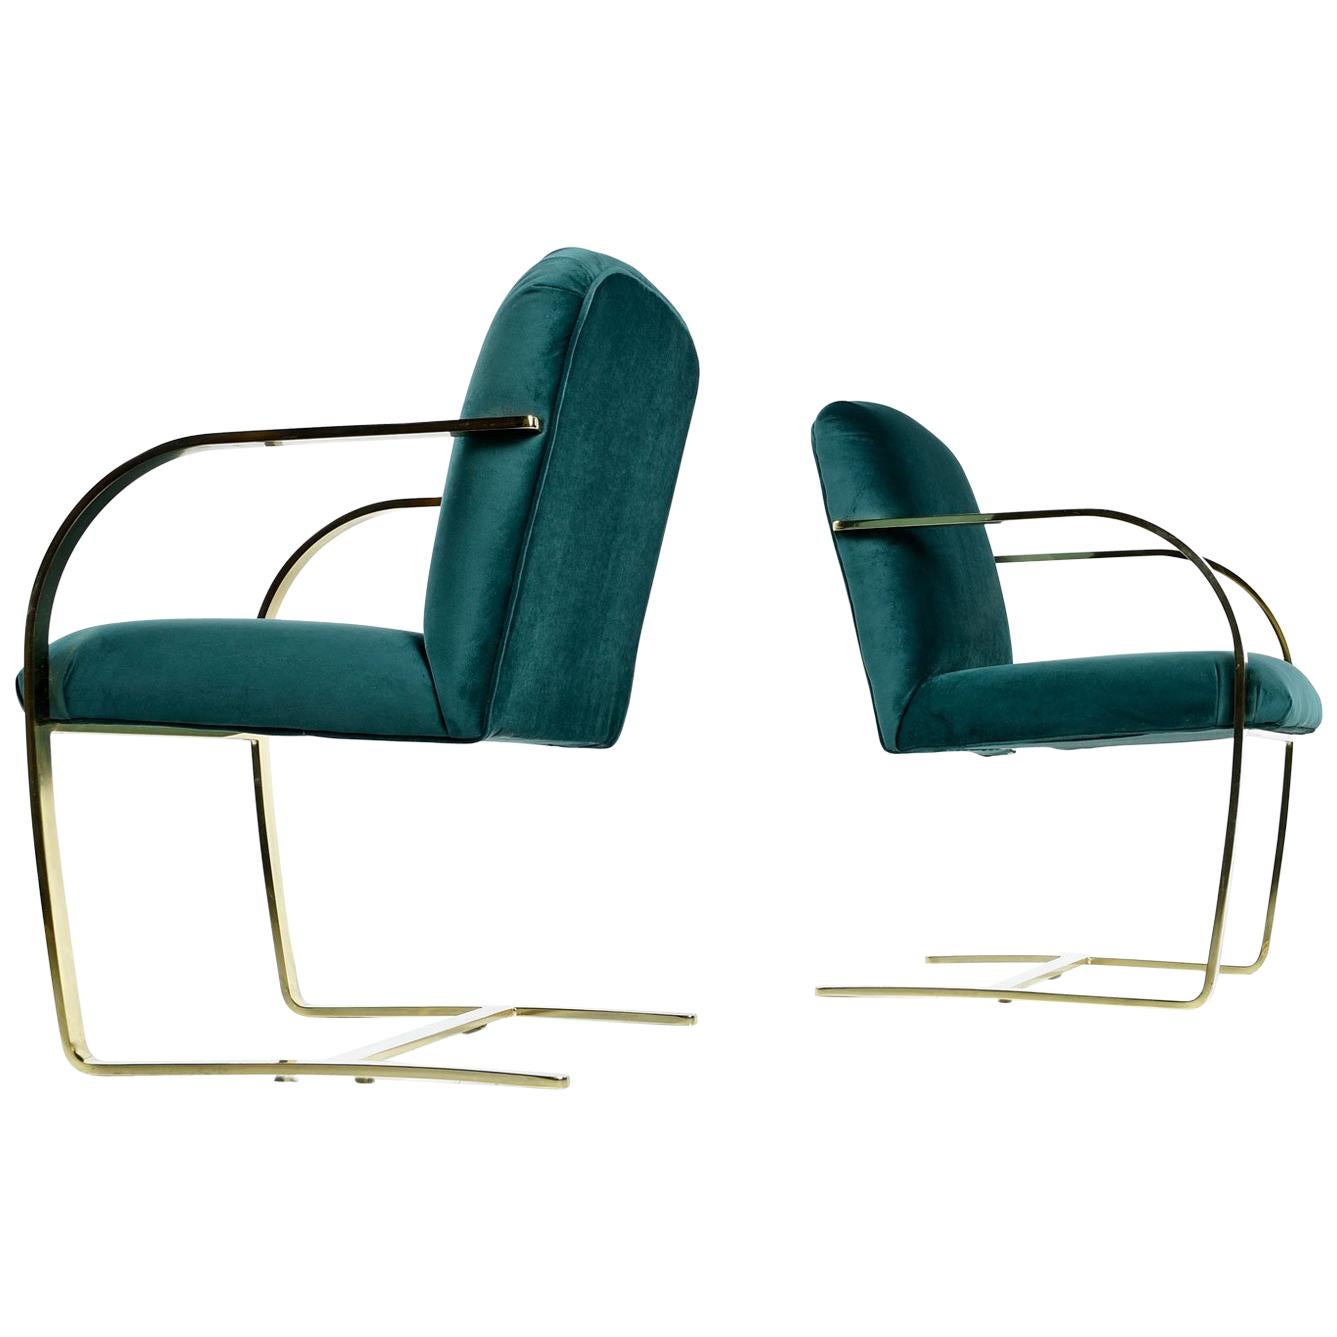 Yes these Hollywood Regency gems are vintage (circa 1970s or 1980s), but they’re not Milo Baughman or Mies van der Rohe BRNO chairs. They’re actually made by American of Martinsville, not Knoll. So what’s the difference? These are heavier duty, more